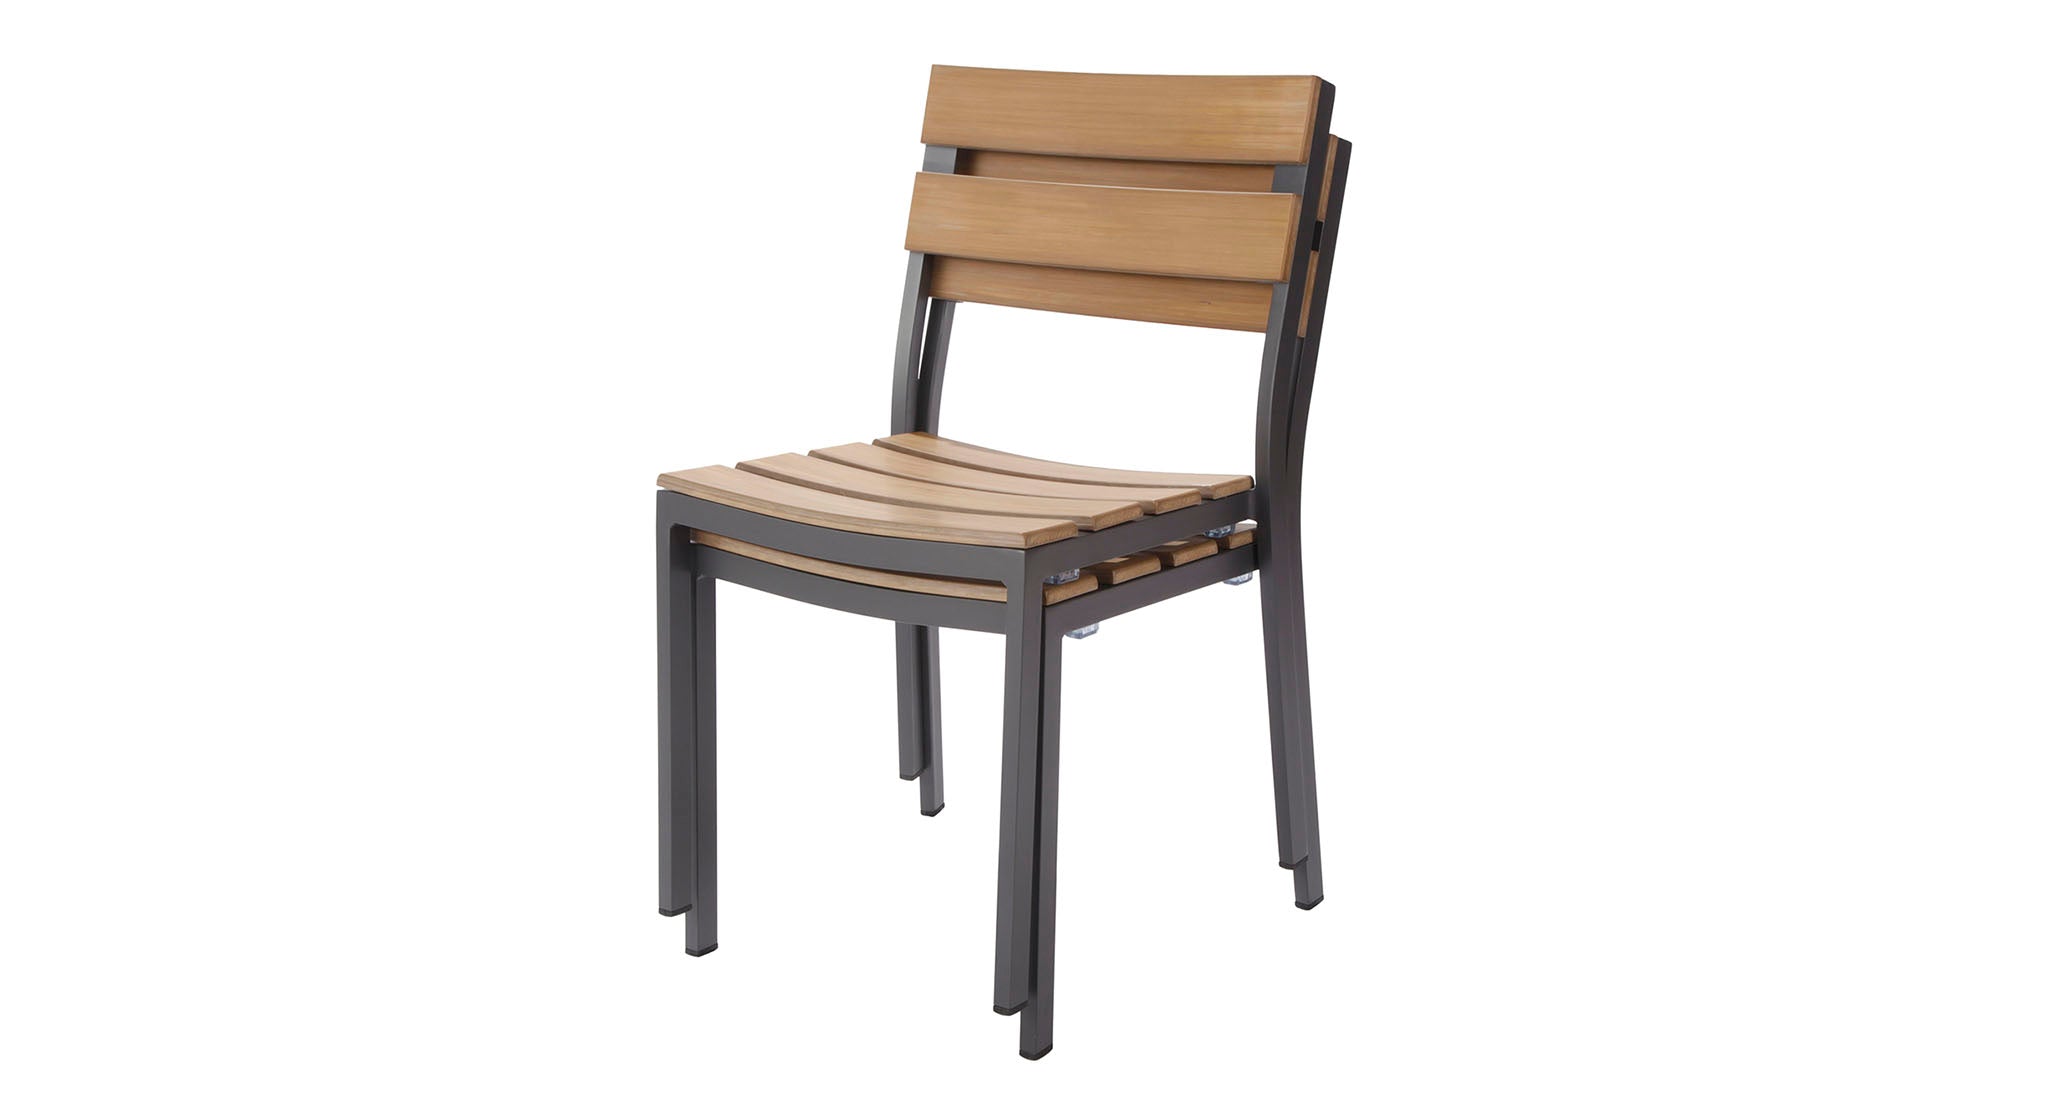 Asher outdoor dining chair 2